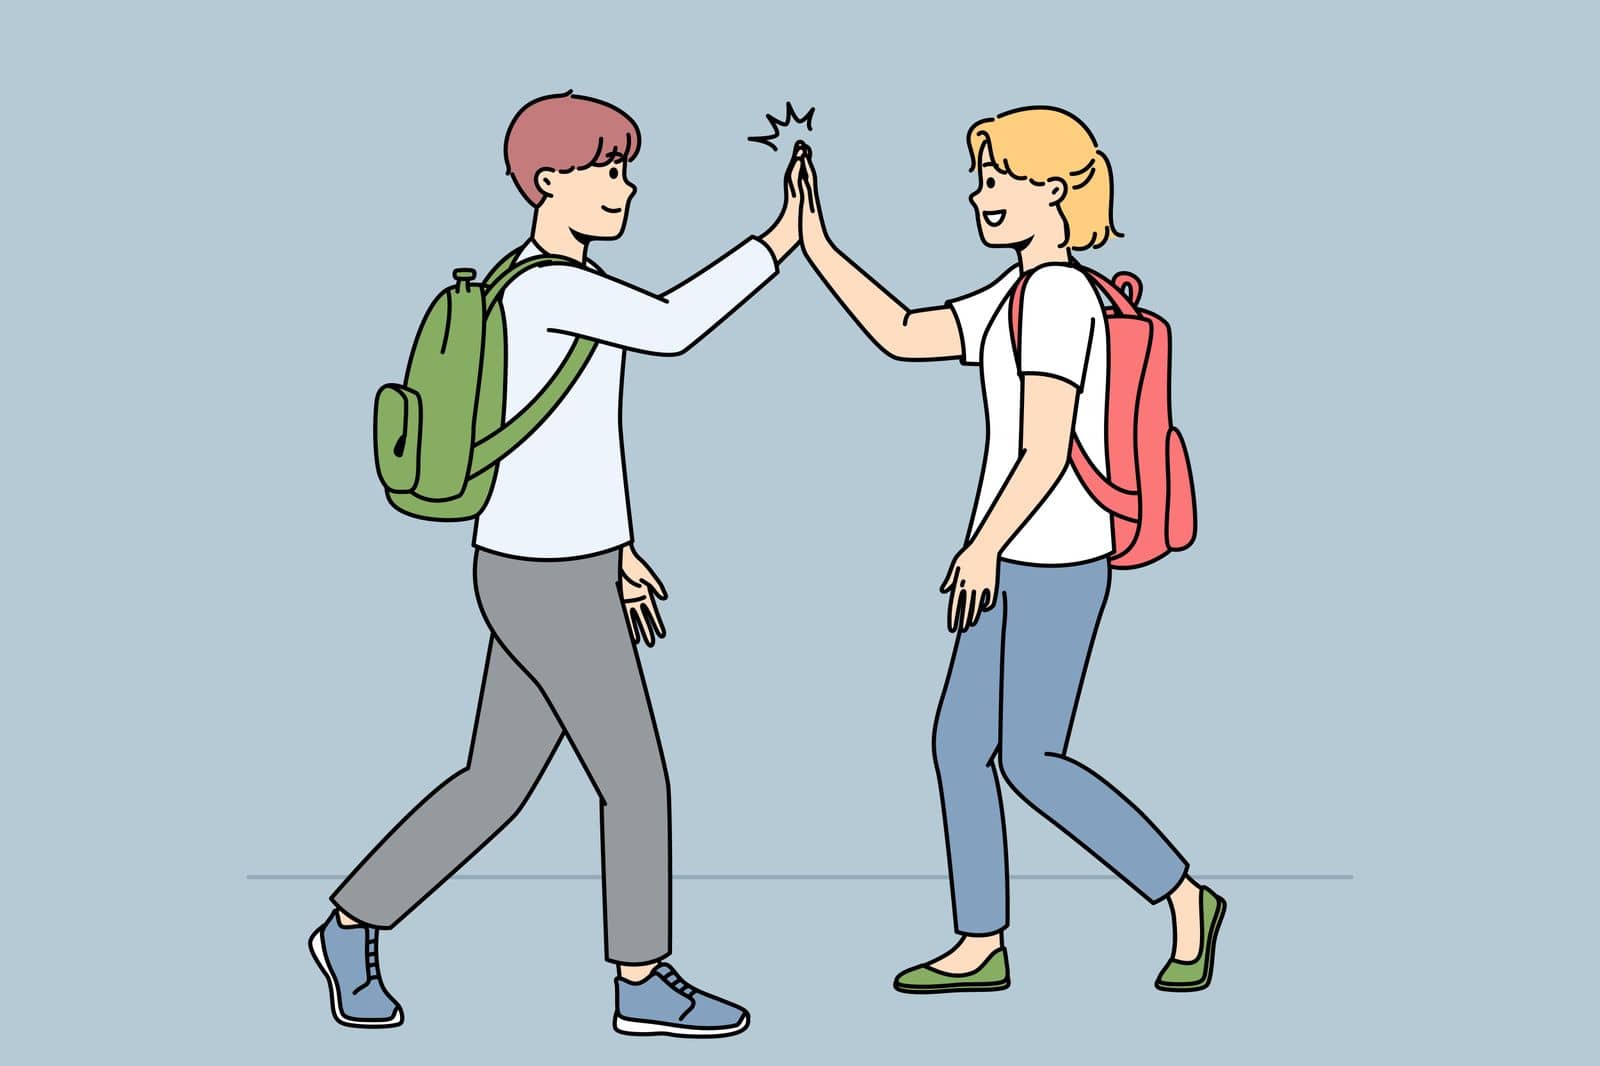 Smiling schoolchildren walking outdoors give high five. Happy friends greeting using non-verbal communication. Vector illustration.